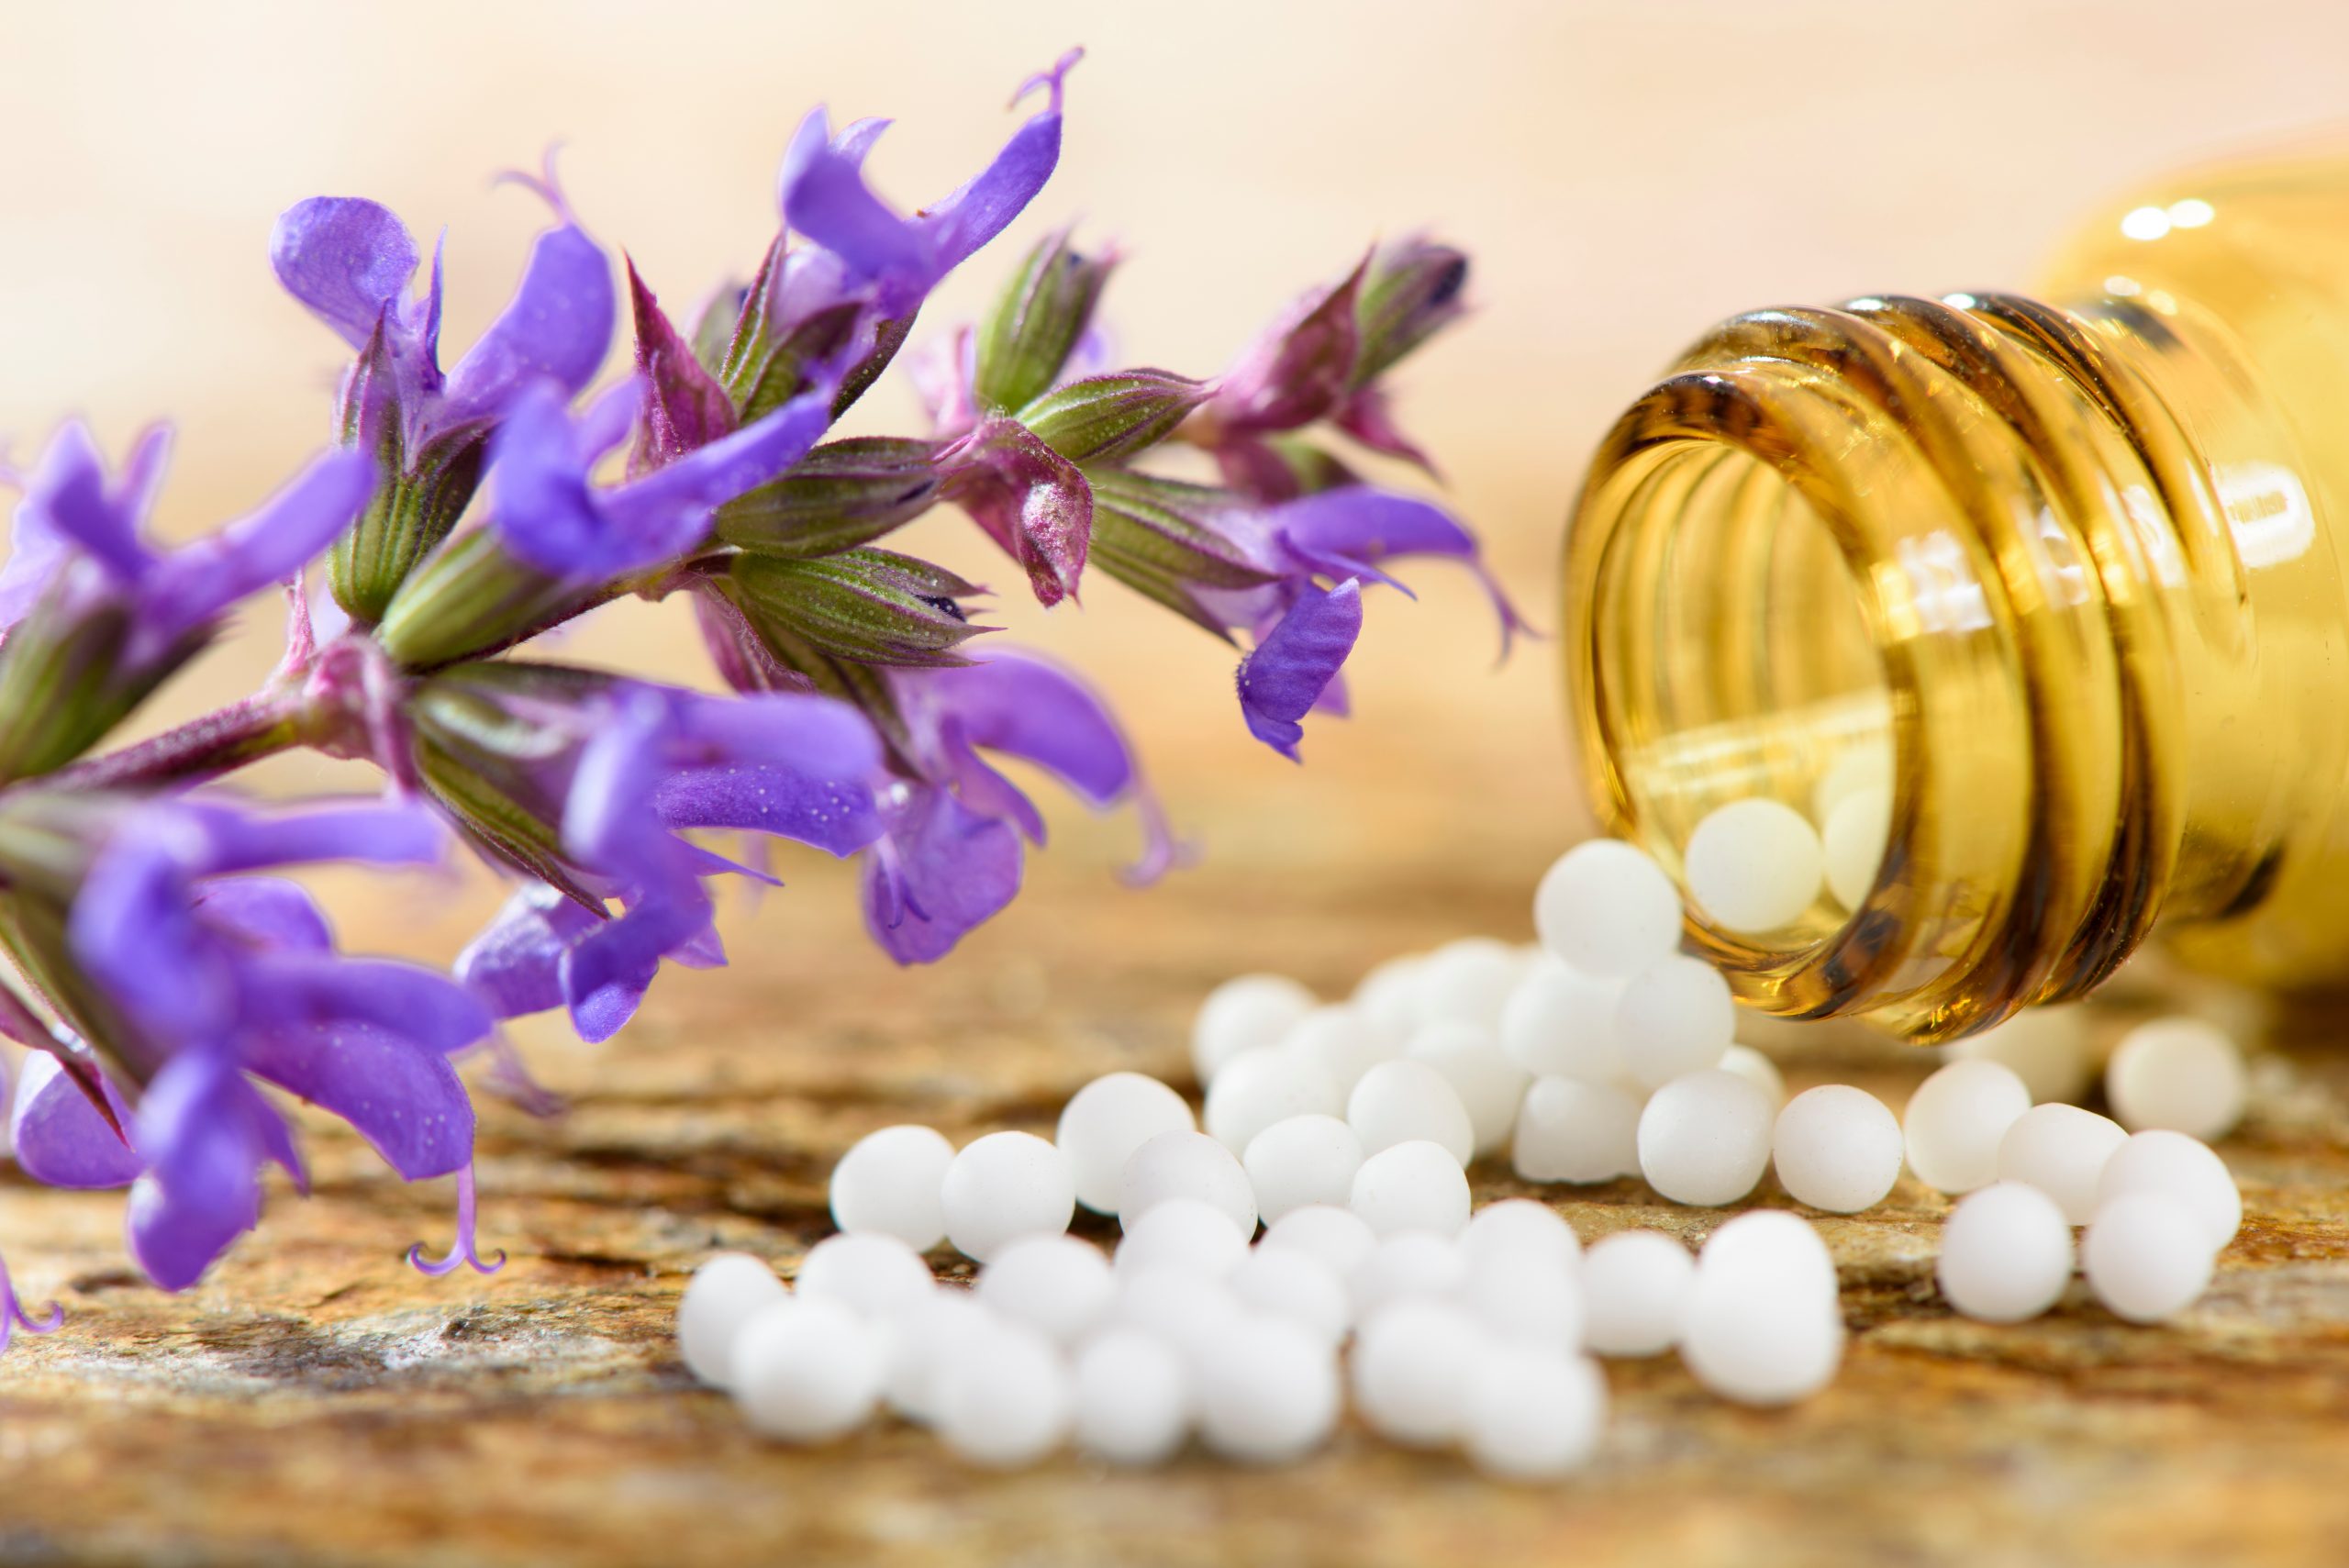 Homeopathic medicine with practitioner Debbie Rayfield